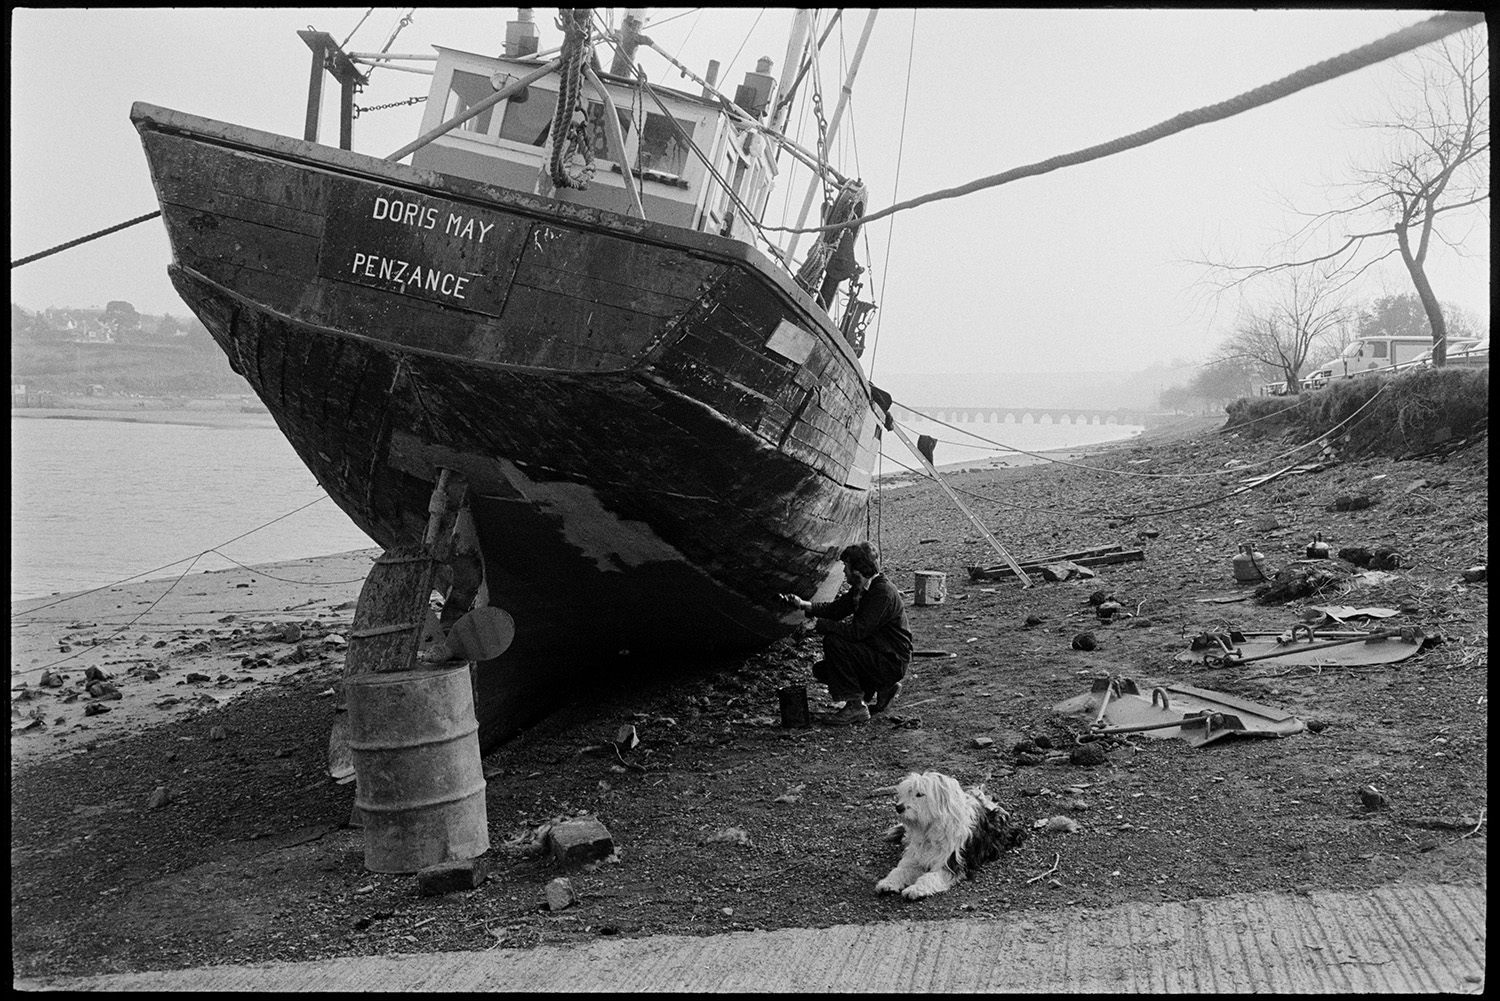 Beached fishing boat, repairs being carried out. 
[A man painting the fishing boat 'Doris May' which is moored on the bank of the River Torridge at Bideford. Bideford Long Bridge, also known as Bideford Old Bridge, is visible in the background. A dog is with the man.]